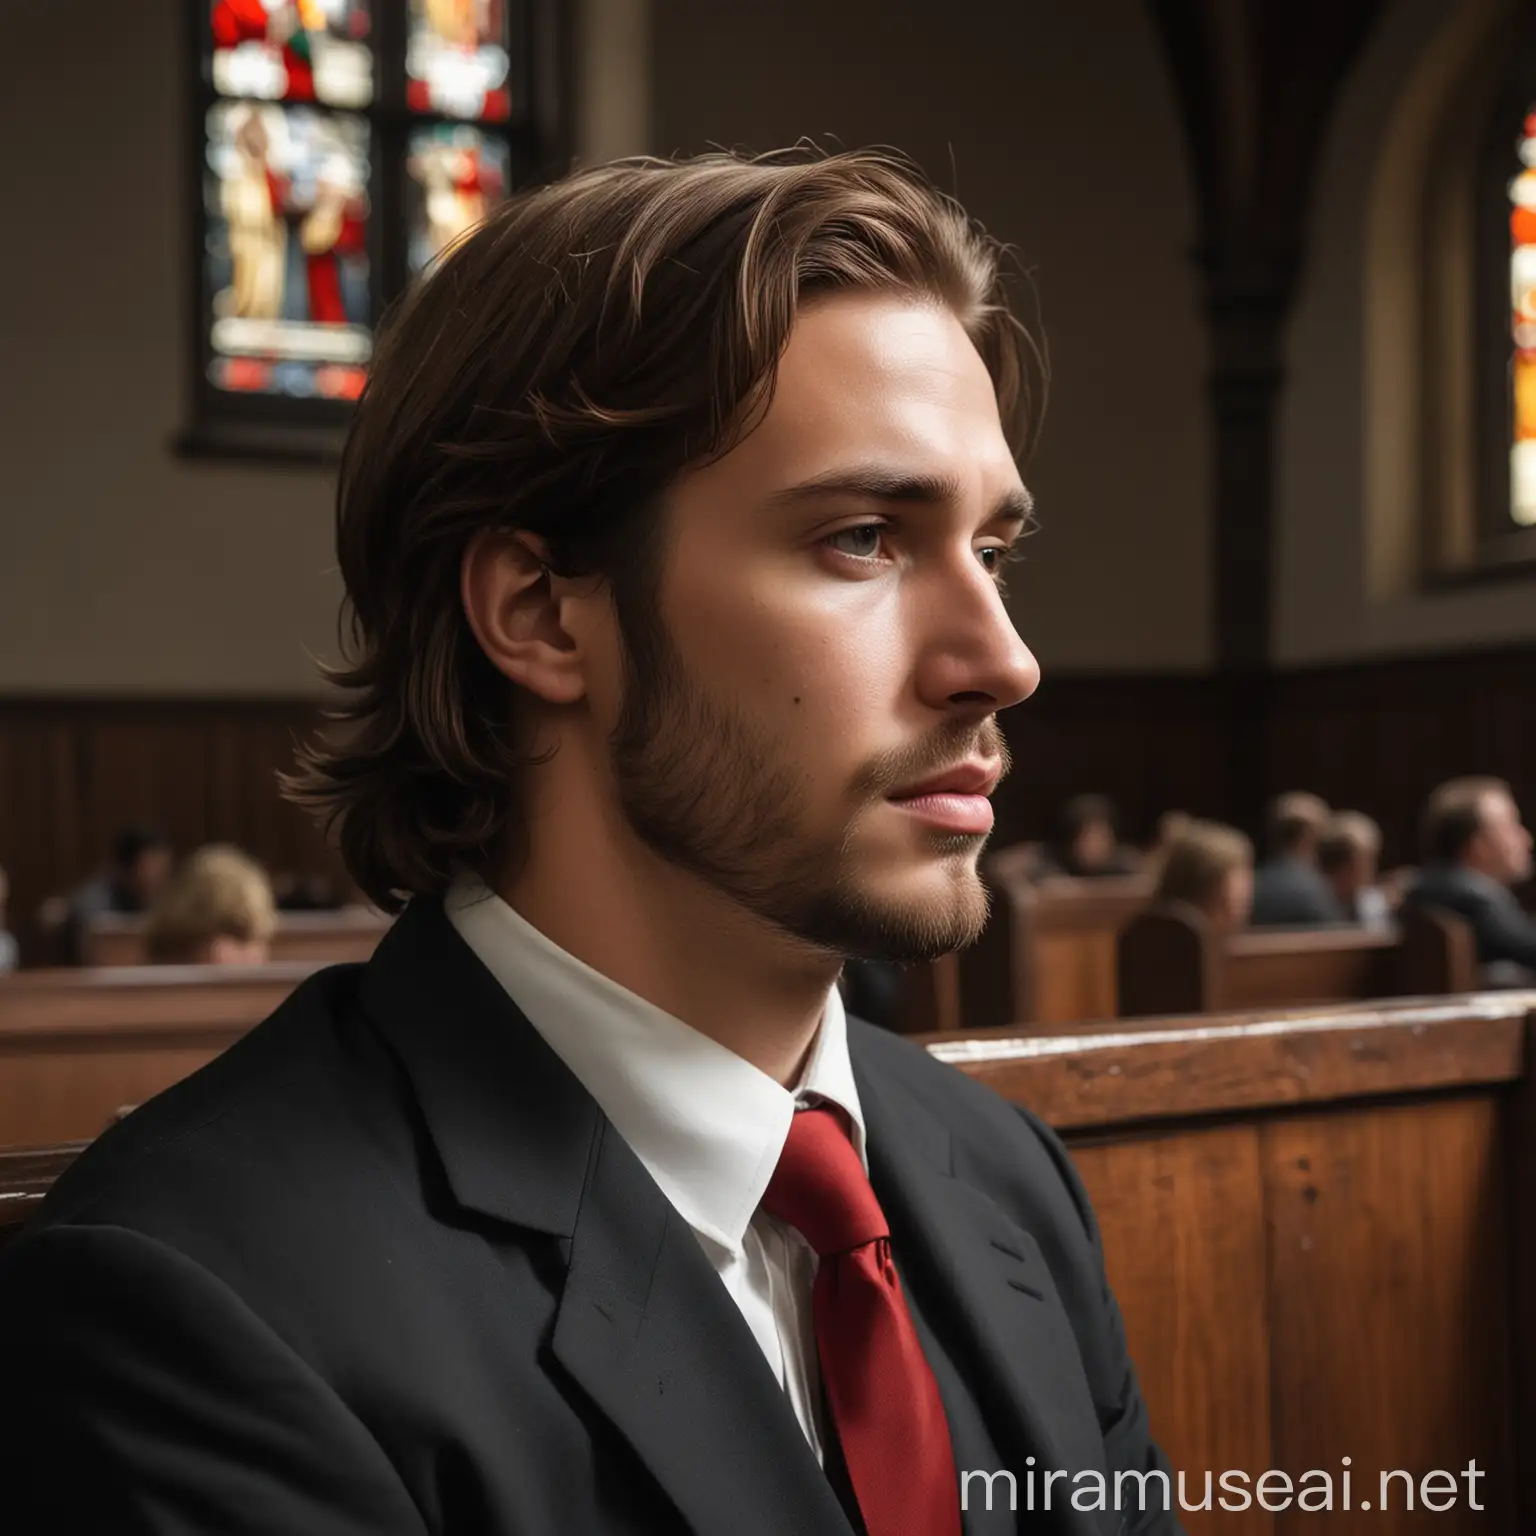 Create a visual arts artwork with a close-up view of a broad-shouldered 27-year-old man with brown hair, dressed in a formal suit, sitting in one of the wooden seats of a dark church. The man should be positioned towards the center of the composition, filling the frame to showcase his tired expression and weary posture. In the background, a subtle hint of a stained glass window on the left side of the photo should be visible, but with less emphasis compared to the main subject. The stained glass window can still depict a clear image of Jesus with minimal red hues. The focus should be on the man and the church's interior, with the white and wooden details adding to the atmosphere of reverence and introspection. The close-up perspective should capture the man's emotional numbness and fatigue, emphasizing the inner turmoil and contemplative mood of the scene.